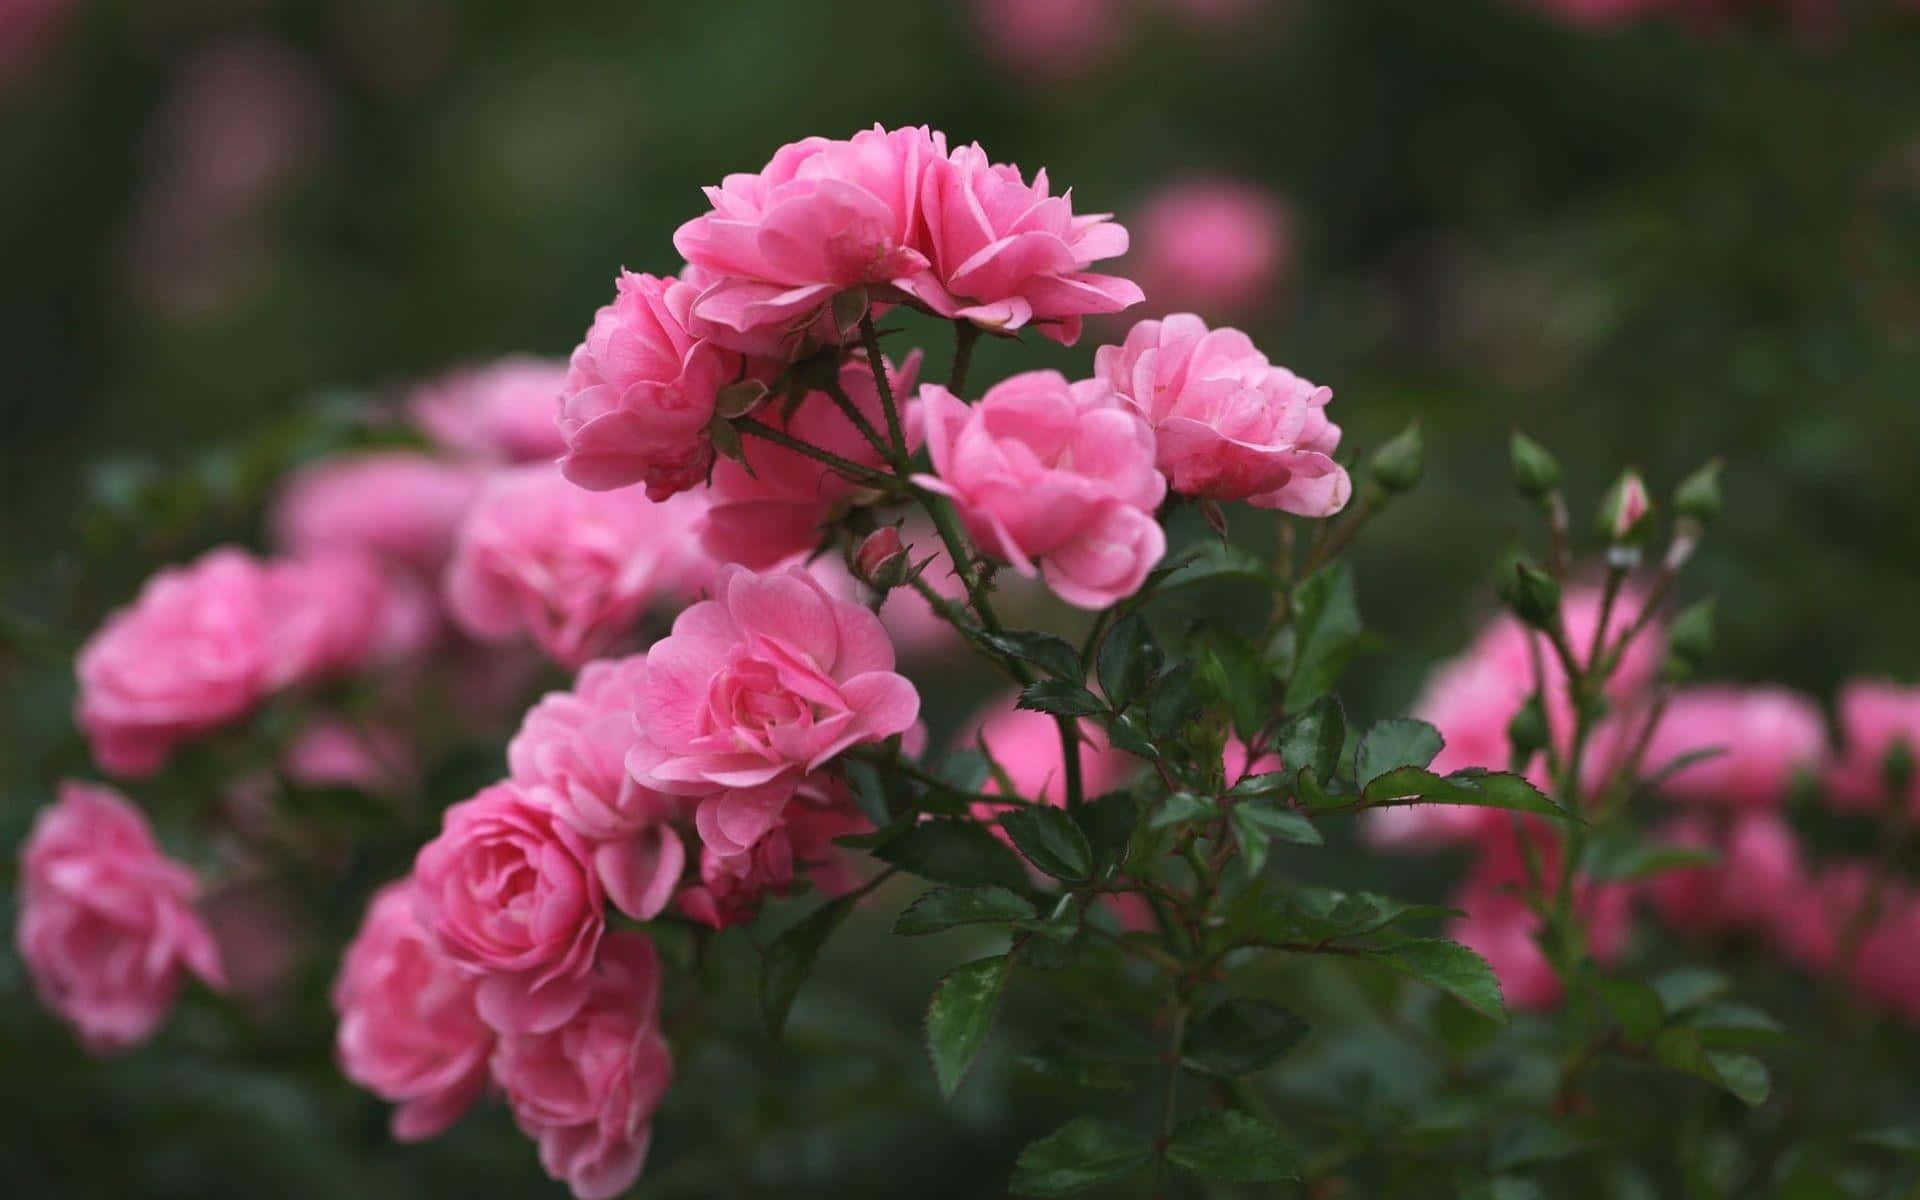 A captivating pink rose blooming in sublime beauty